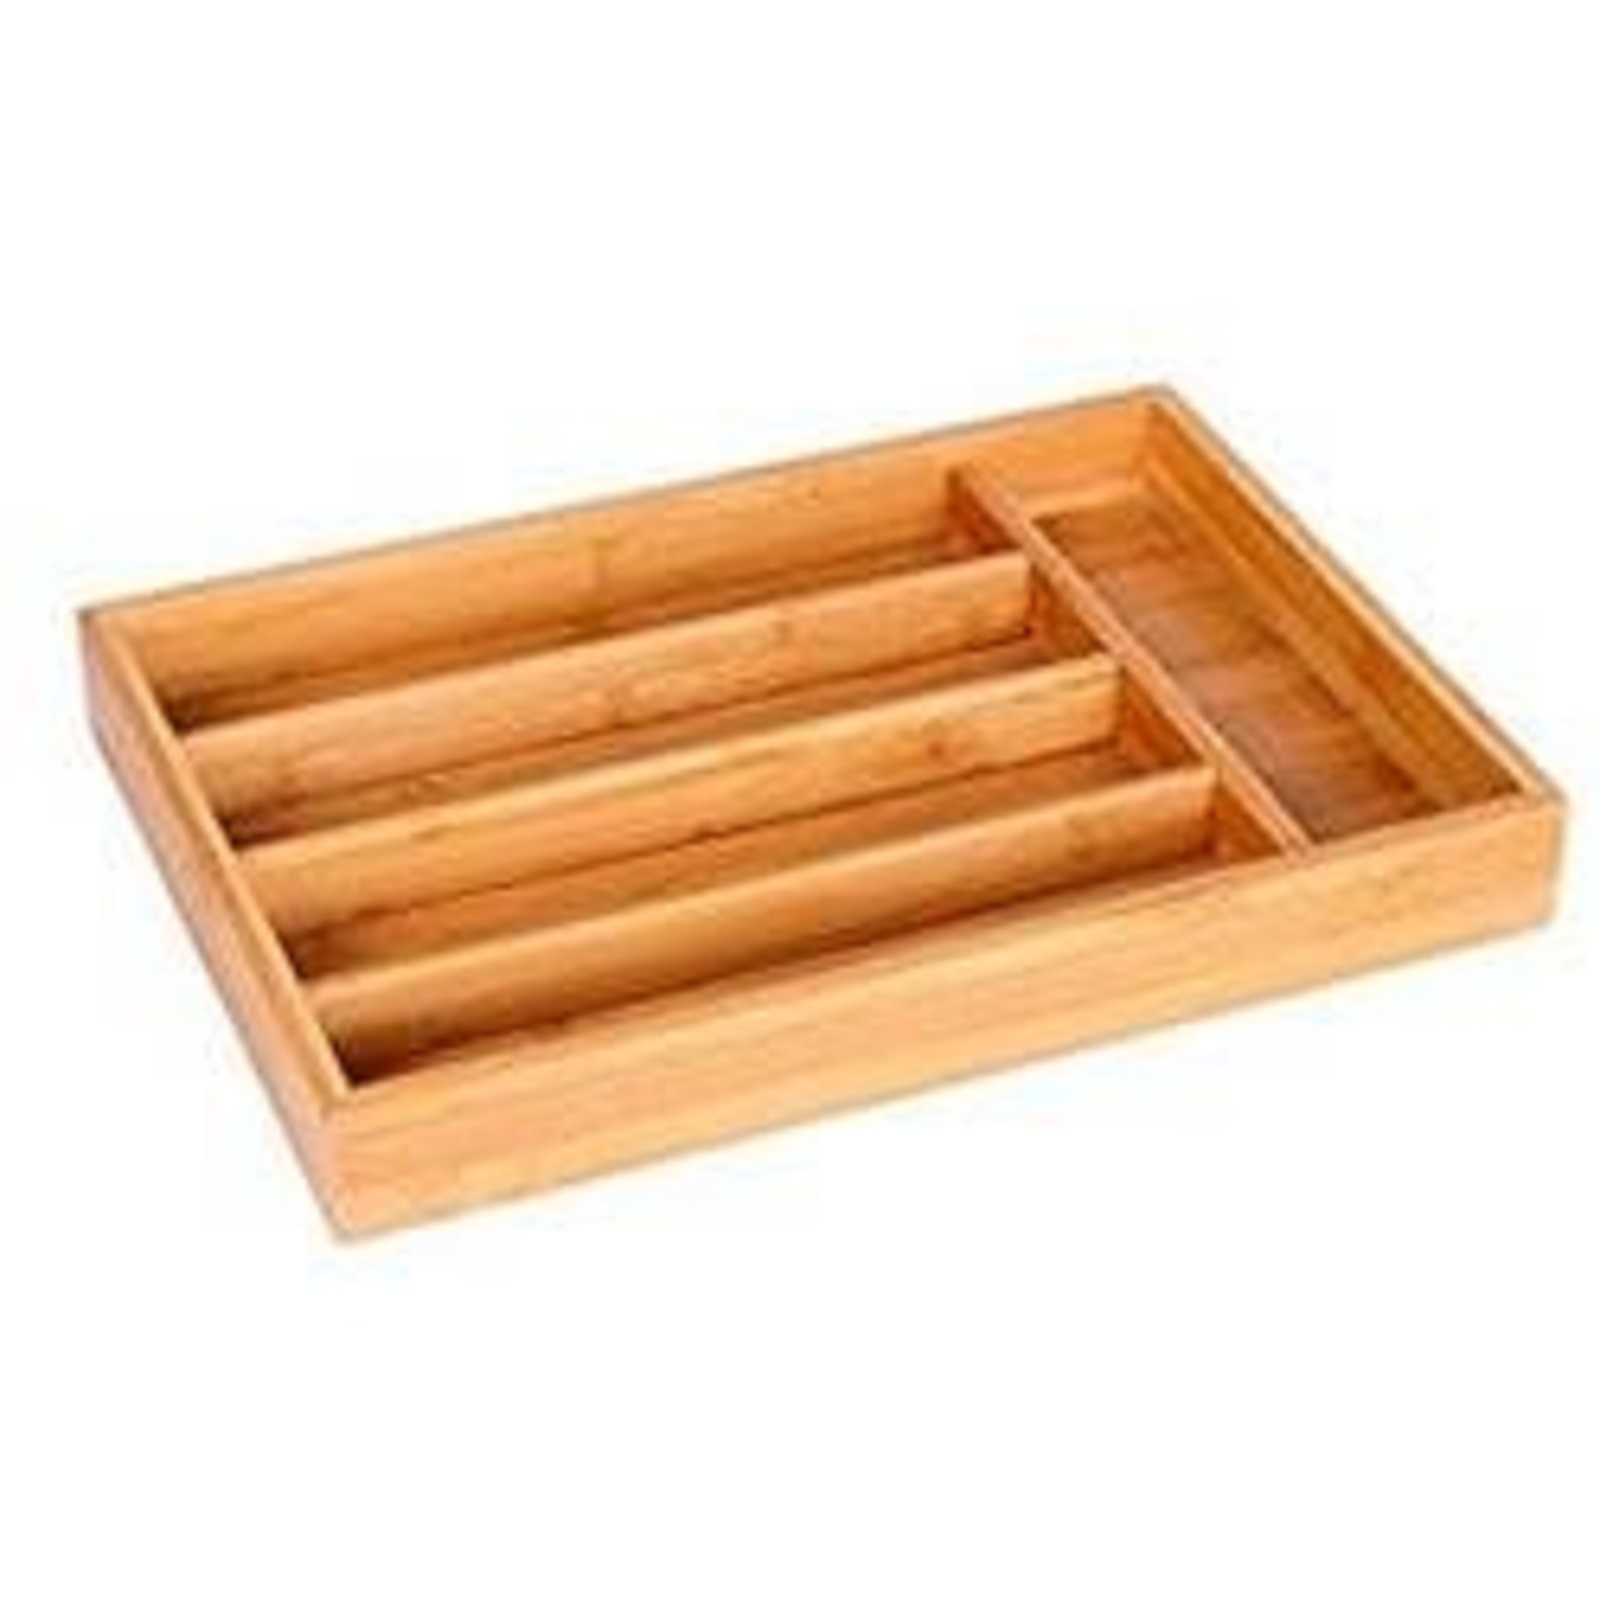 Culinary Edge Bamboo Utility Drawer Organizer- 5 Compartment